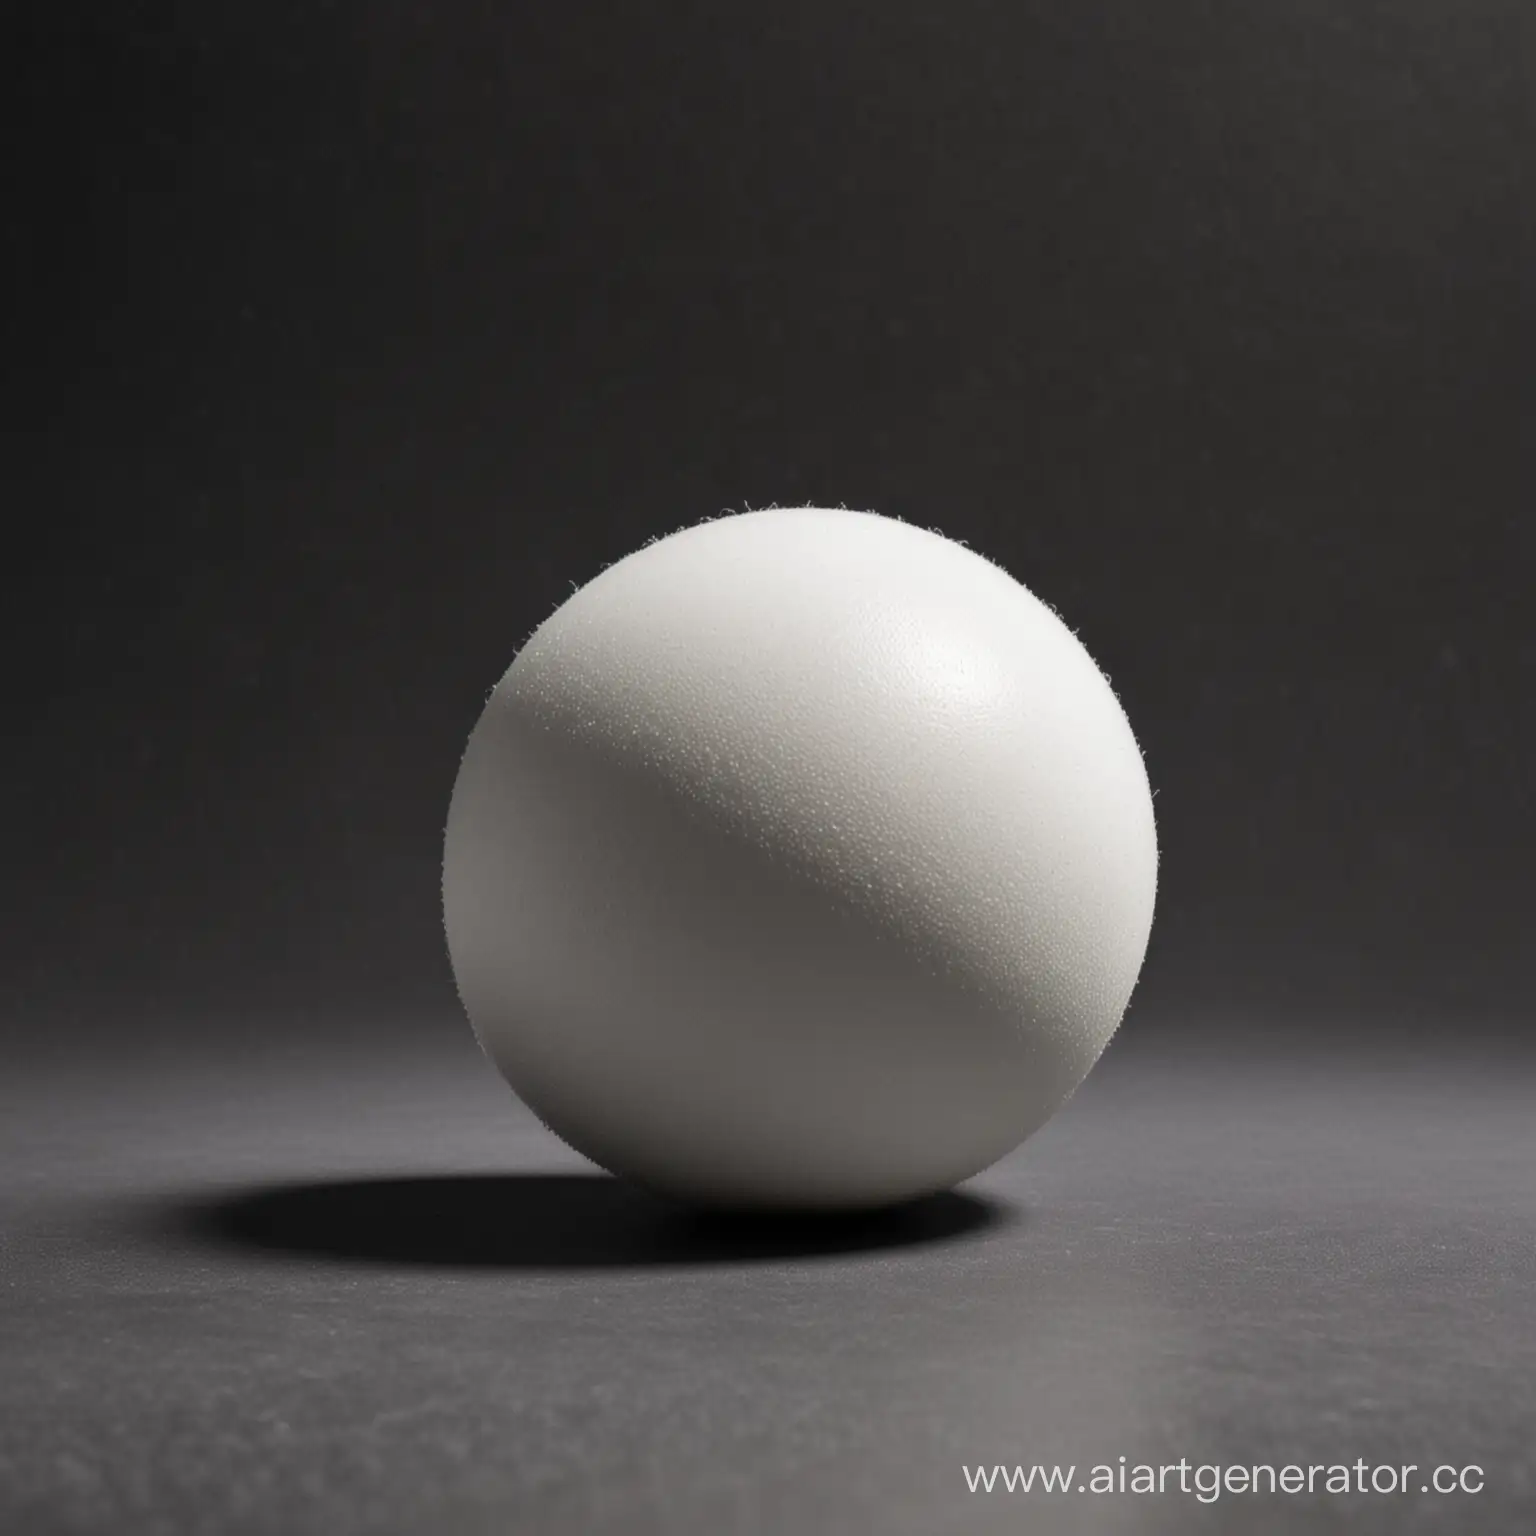 Contrast-White-Ball-on-Black-Background